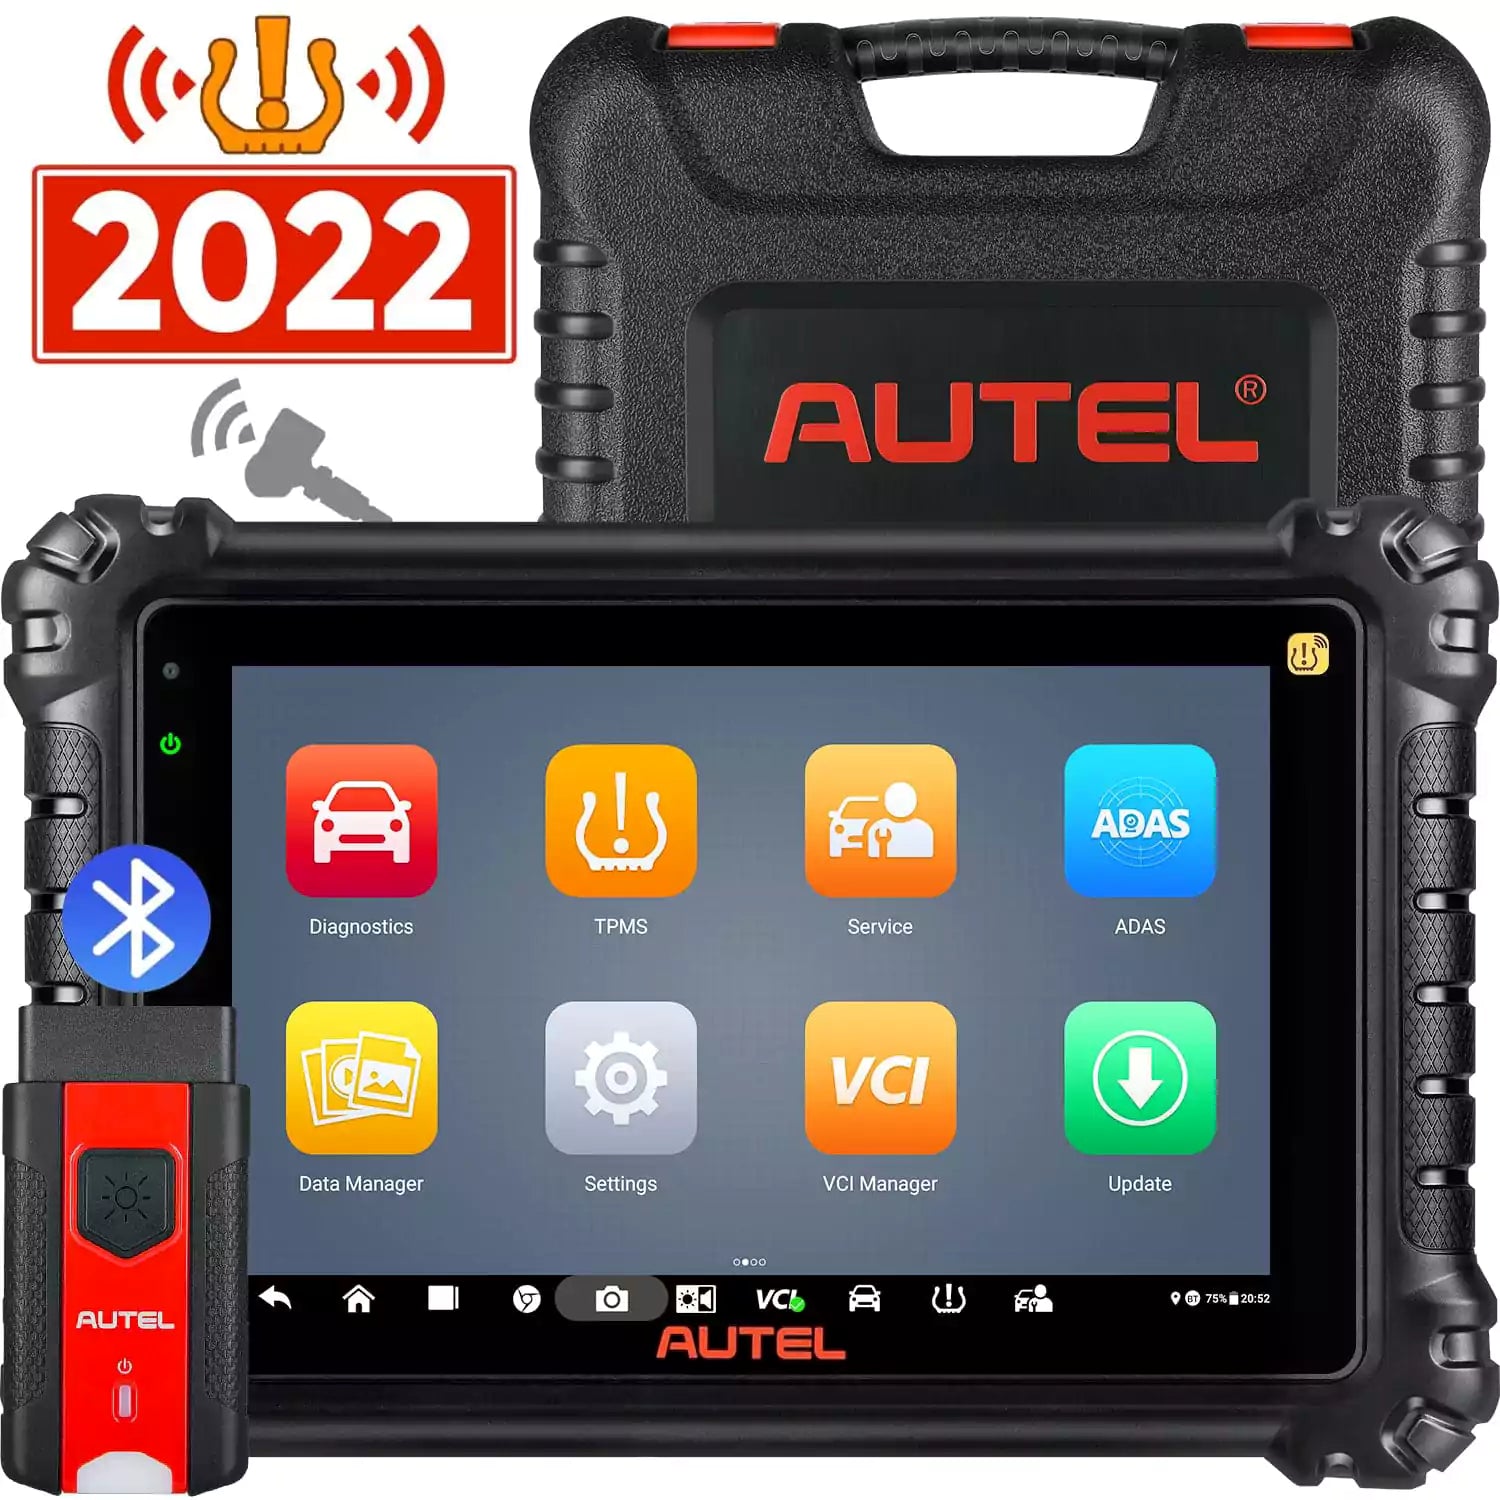 Autel MaxiSys MS906TS 2022 Version, Same Function As MS906 Pro-TS